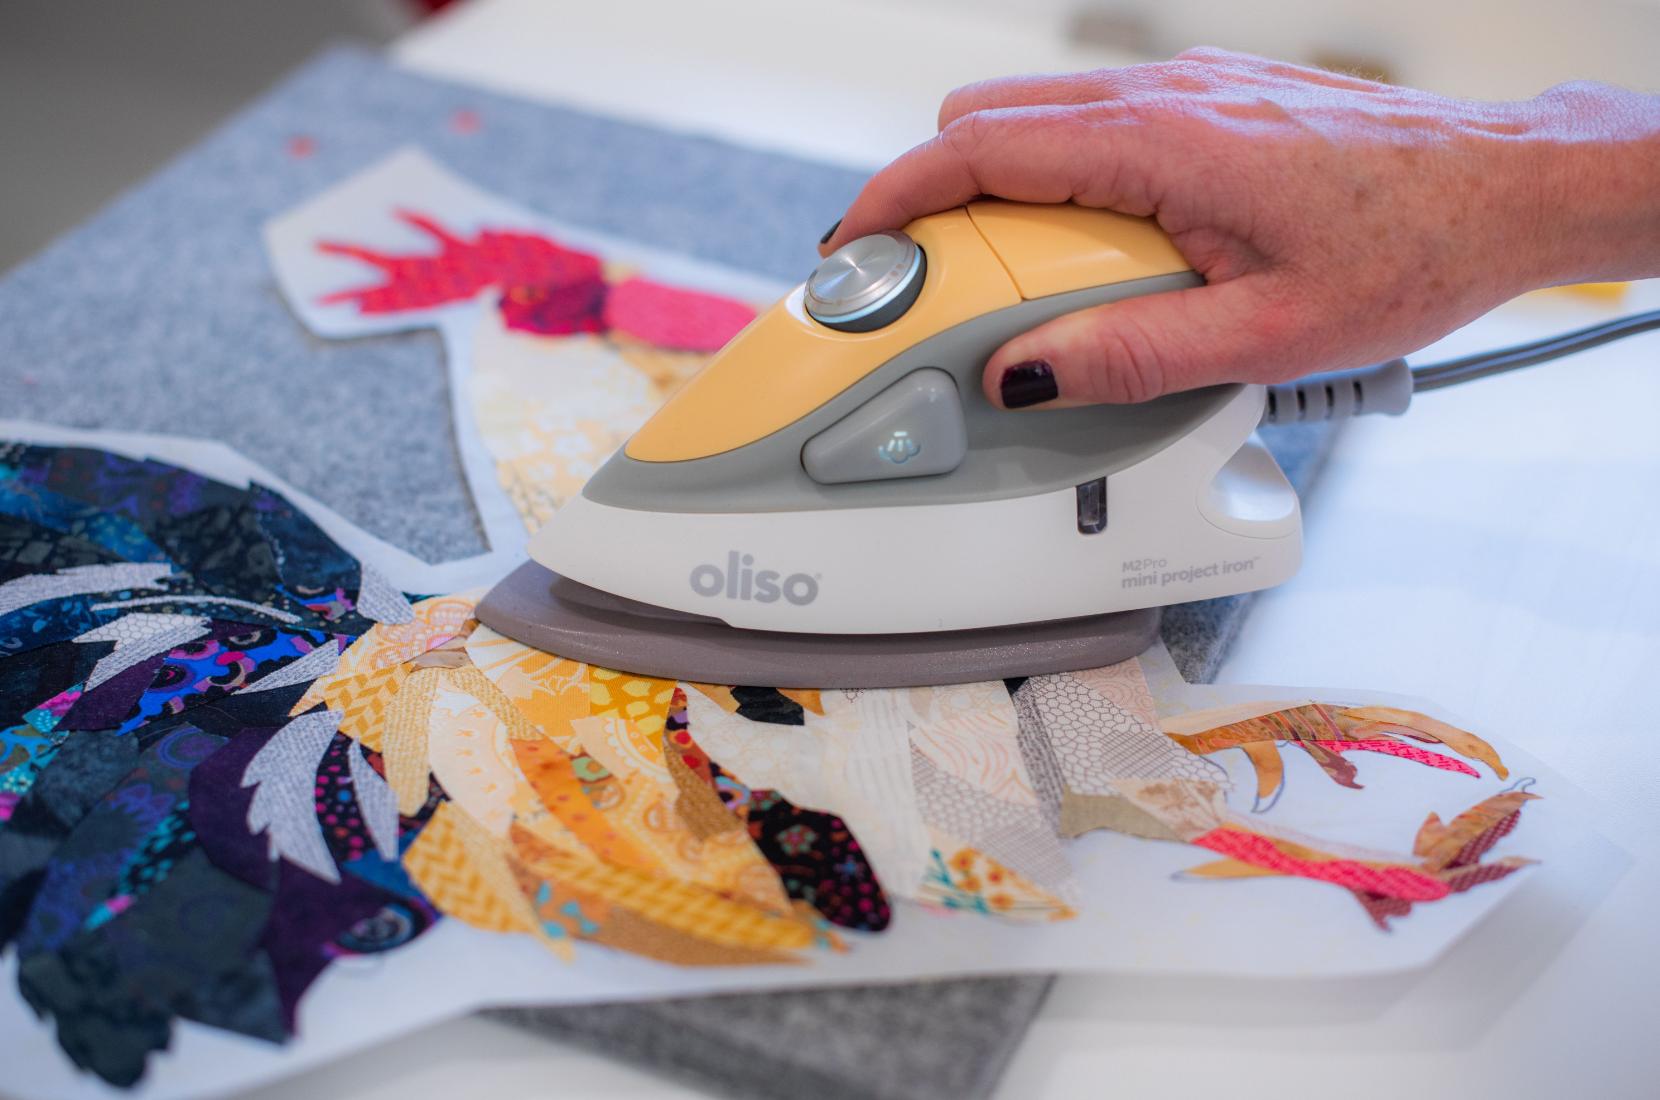 Product Review: Oliso Mini Project Iron